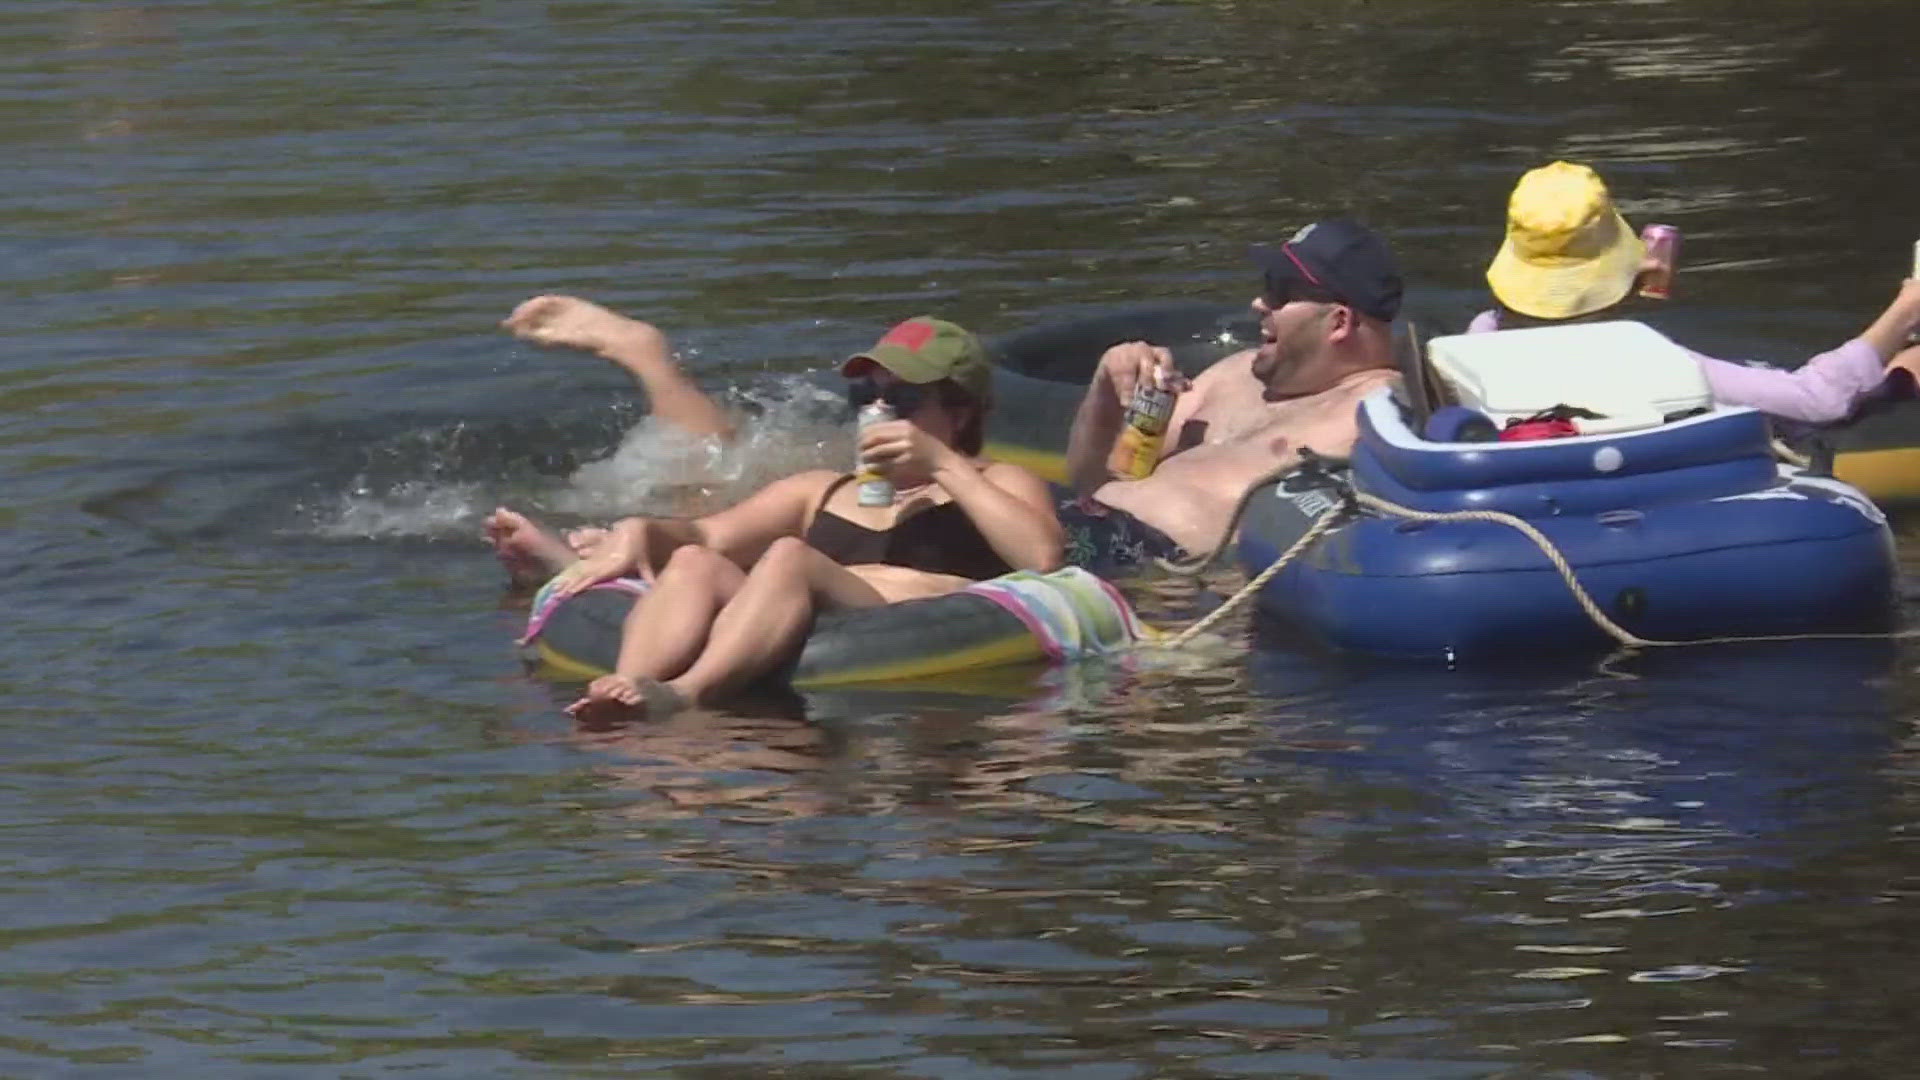 Salt River Tubing is set to open on Saturday, April 27. Here's everything you need to know.